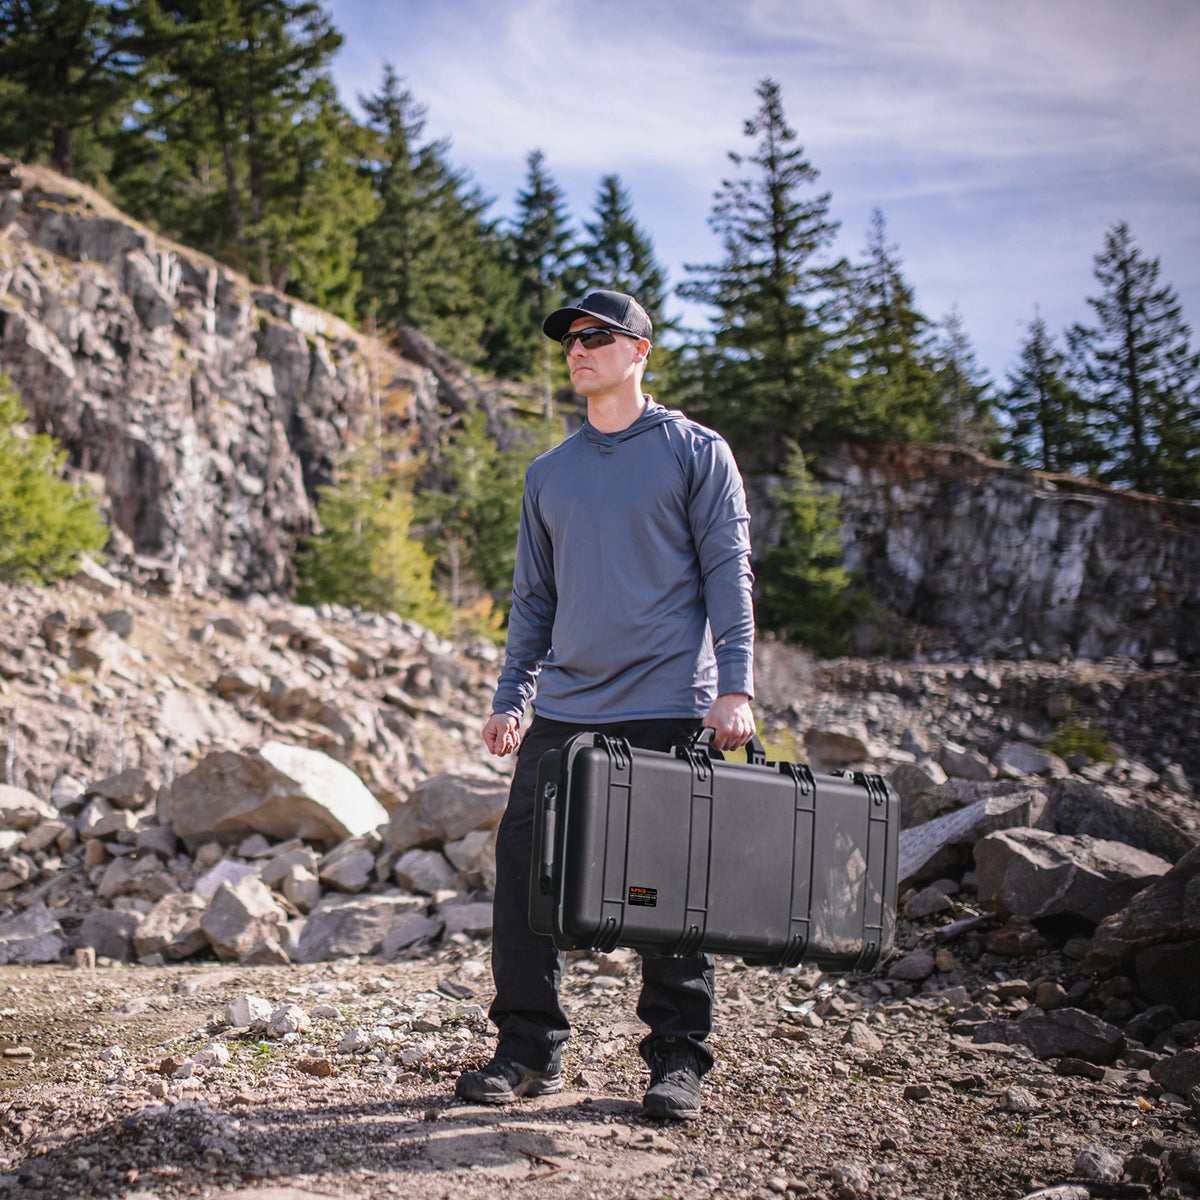 RPNB PP-12150 Weatherproof Hard Rifle Case with Customizable Foam Insert Person Carrying on Rocks